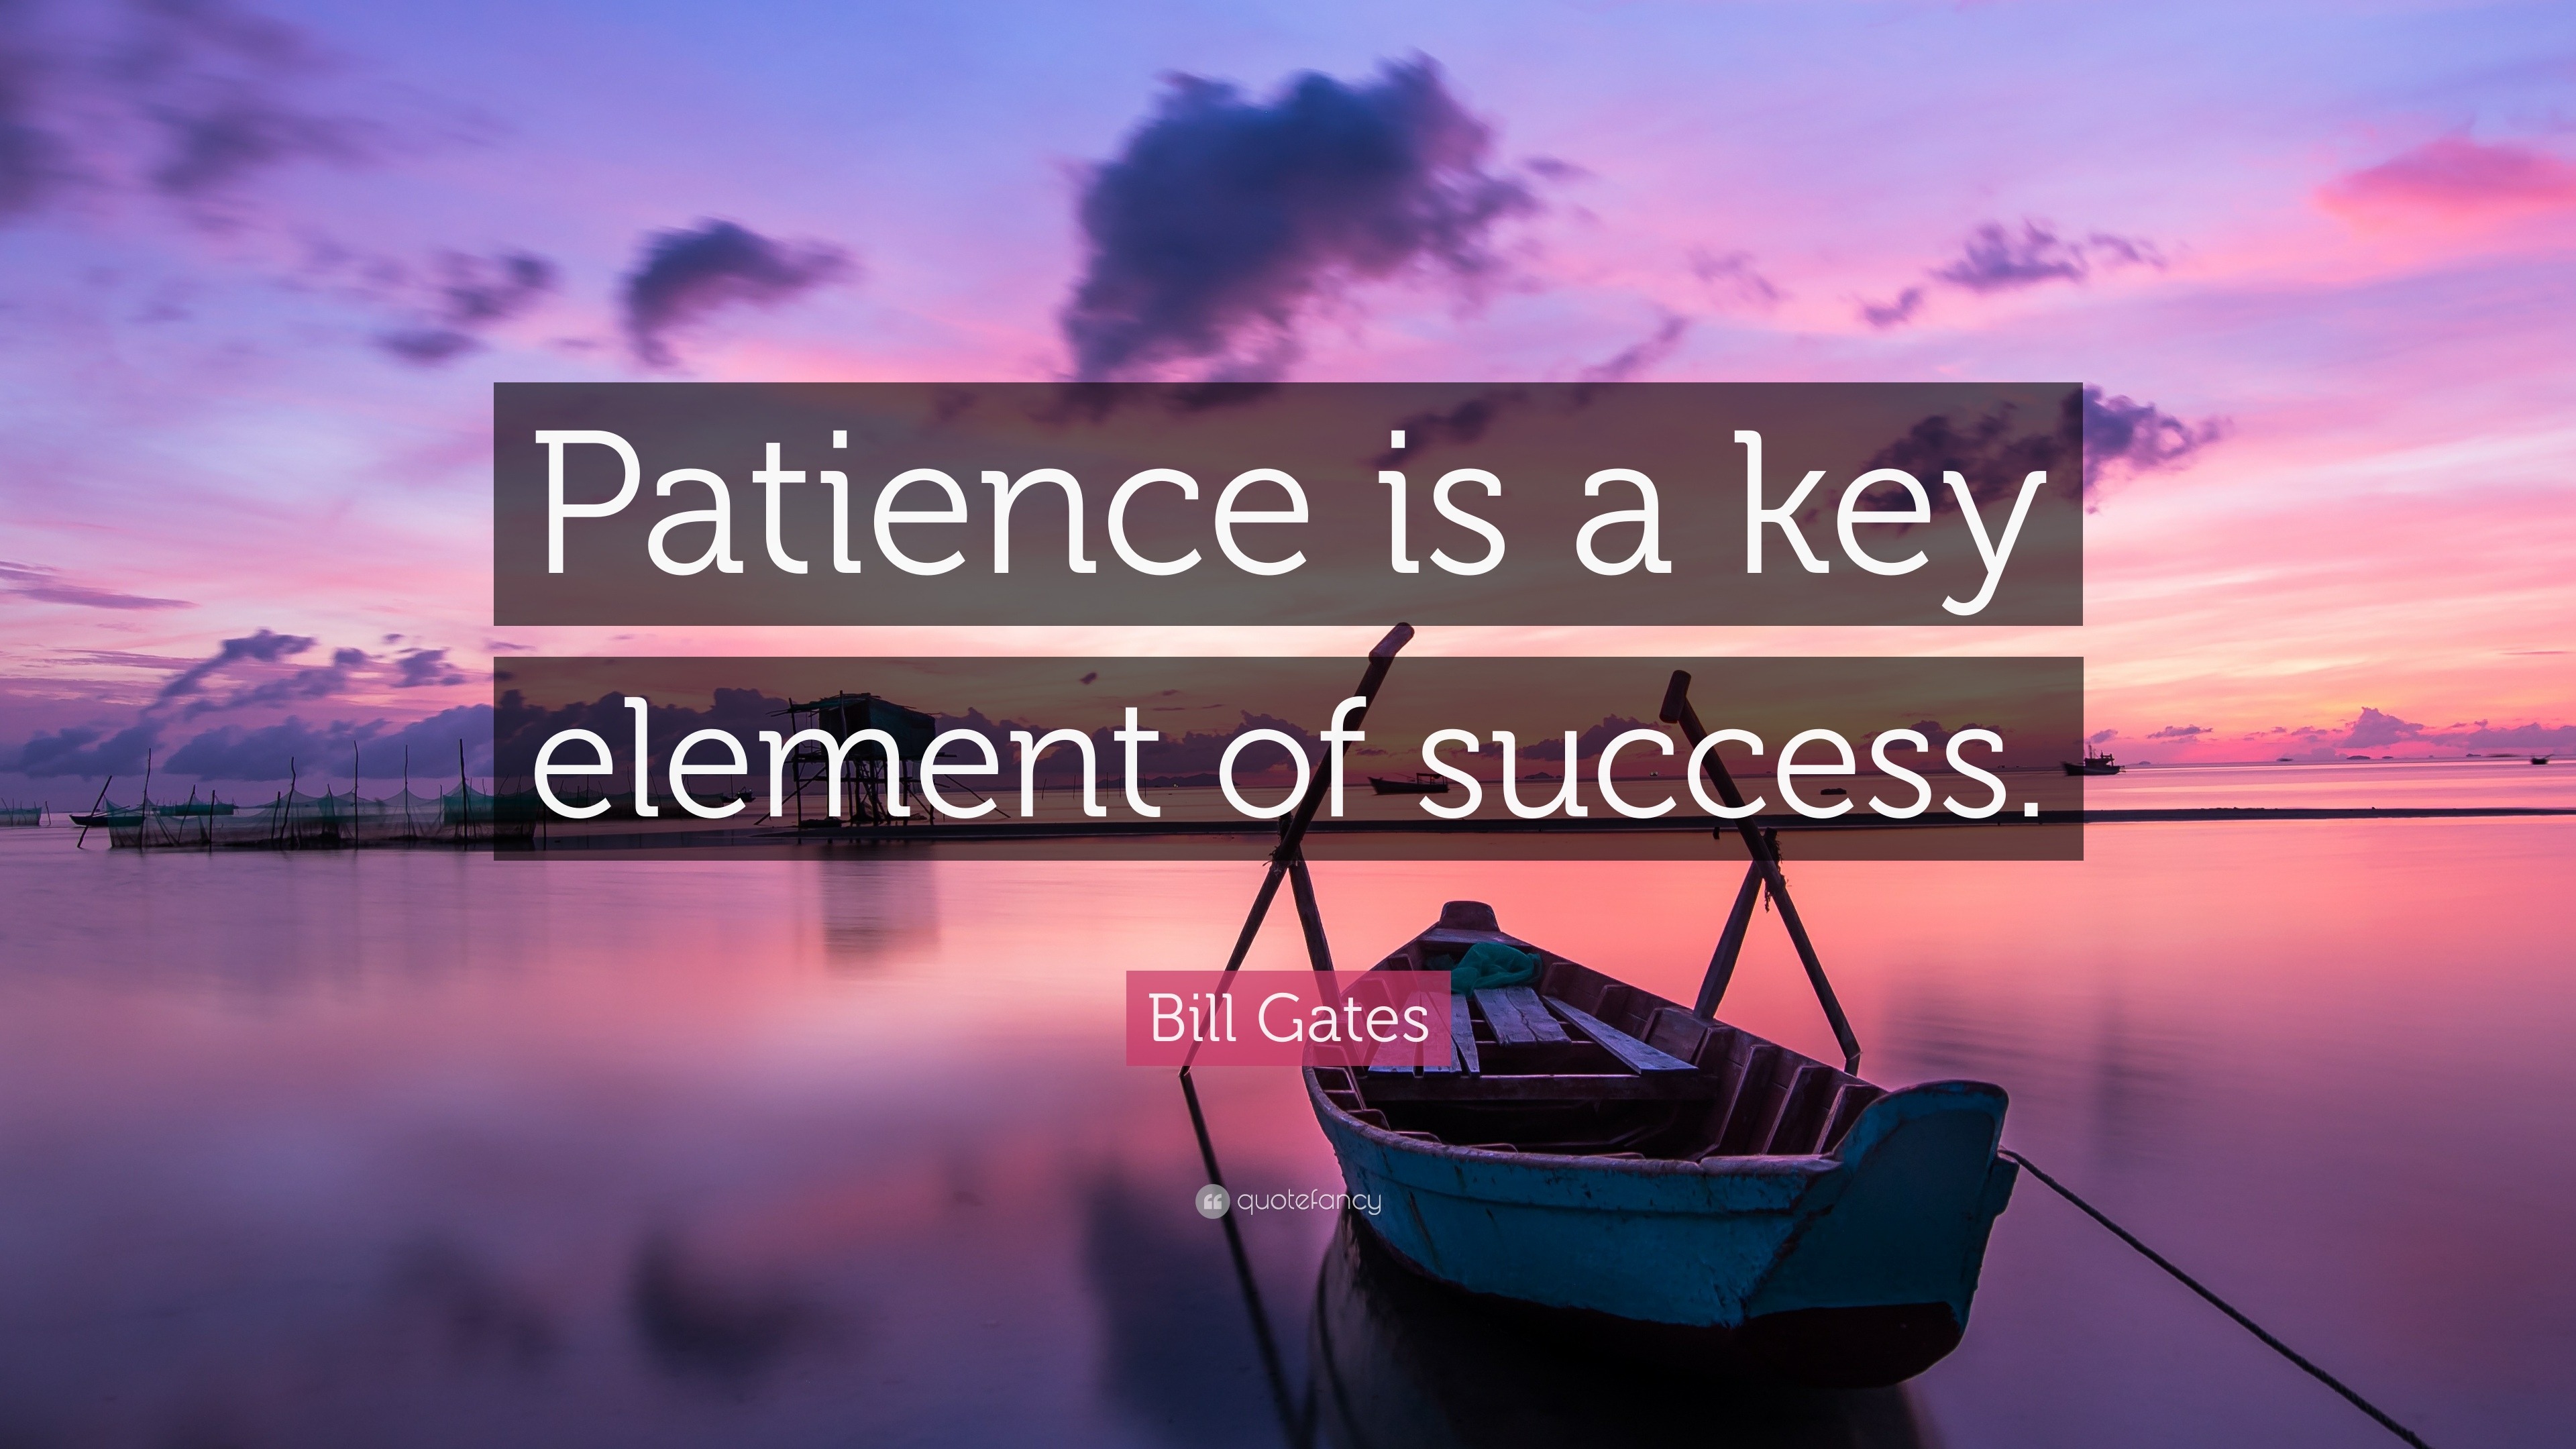 Bill Gates Quote: “Patience is a key element of success.” (40